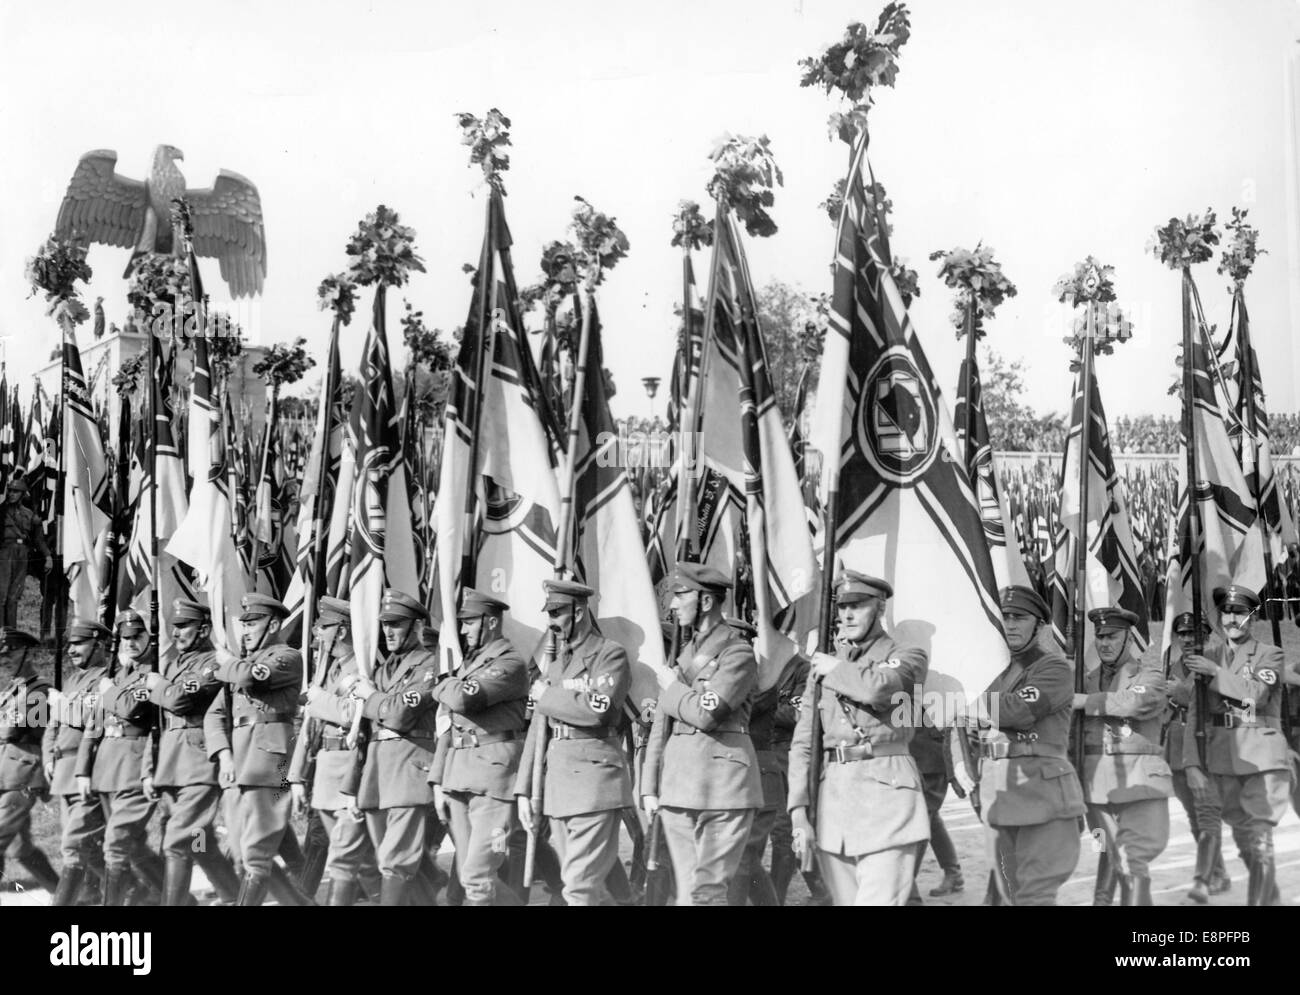 Nuremberg Rally 1934 in Nuremberg, Germany - Flag bearers of the SA (Sturmabteilung) reserve unit 2 (Stahlhelm) are on parade at the Nazi party rally grounds. (Flaws in quality due to the historic picture copy) Fotoarchiv für Zeitgeschichtee - NO WIRE SERVICE - Stock Photo